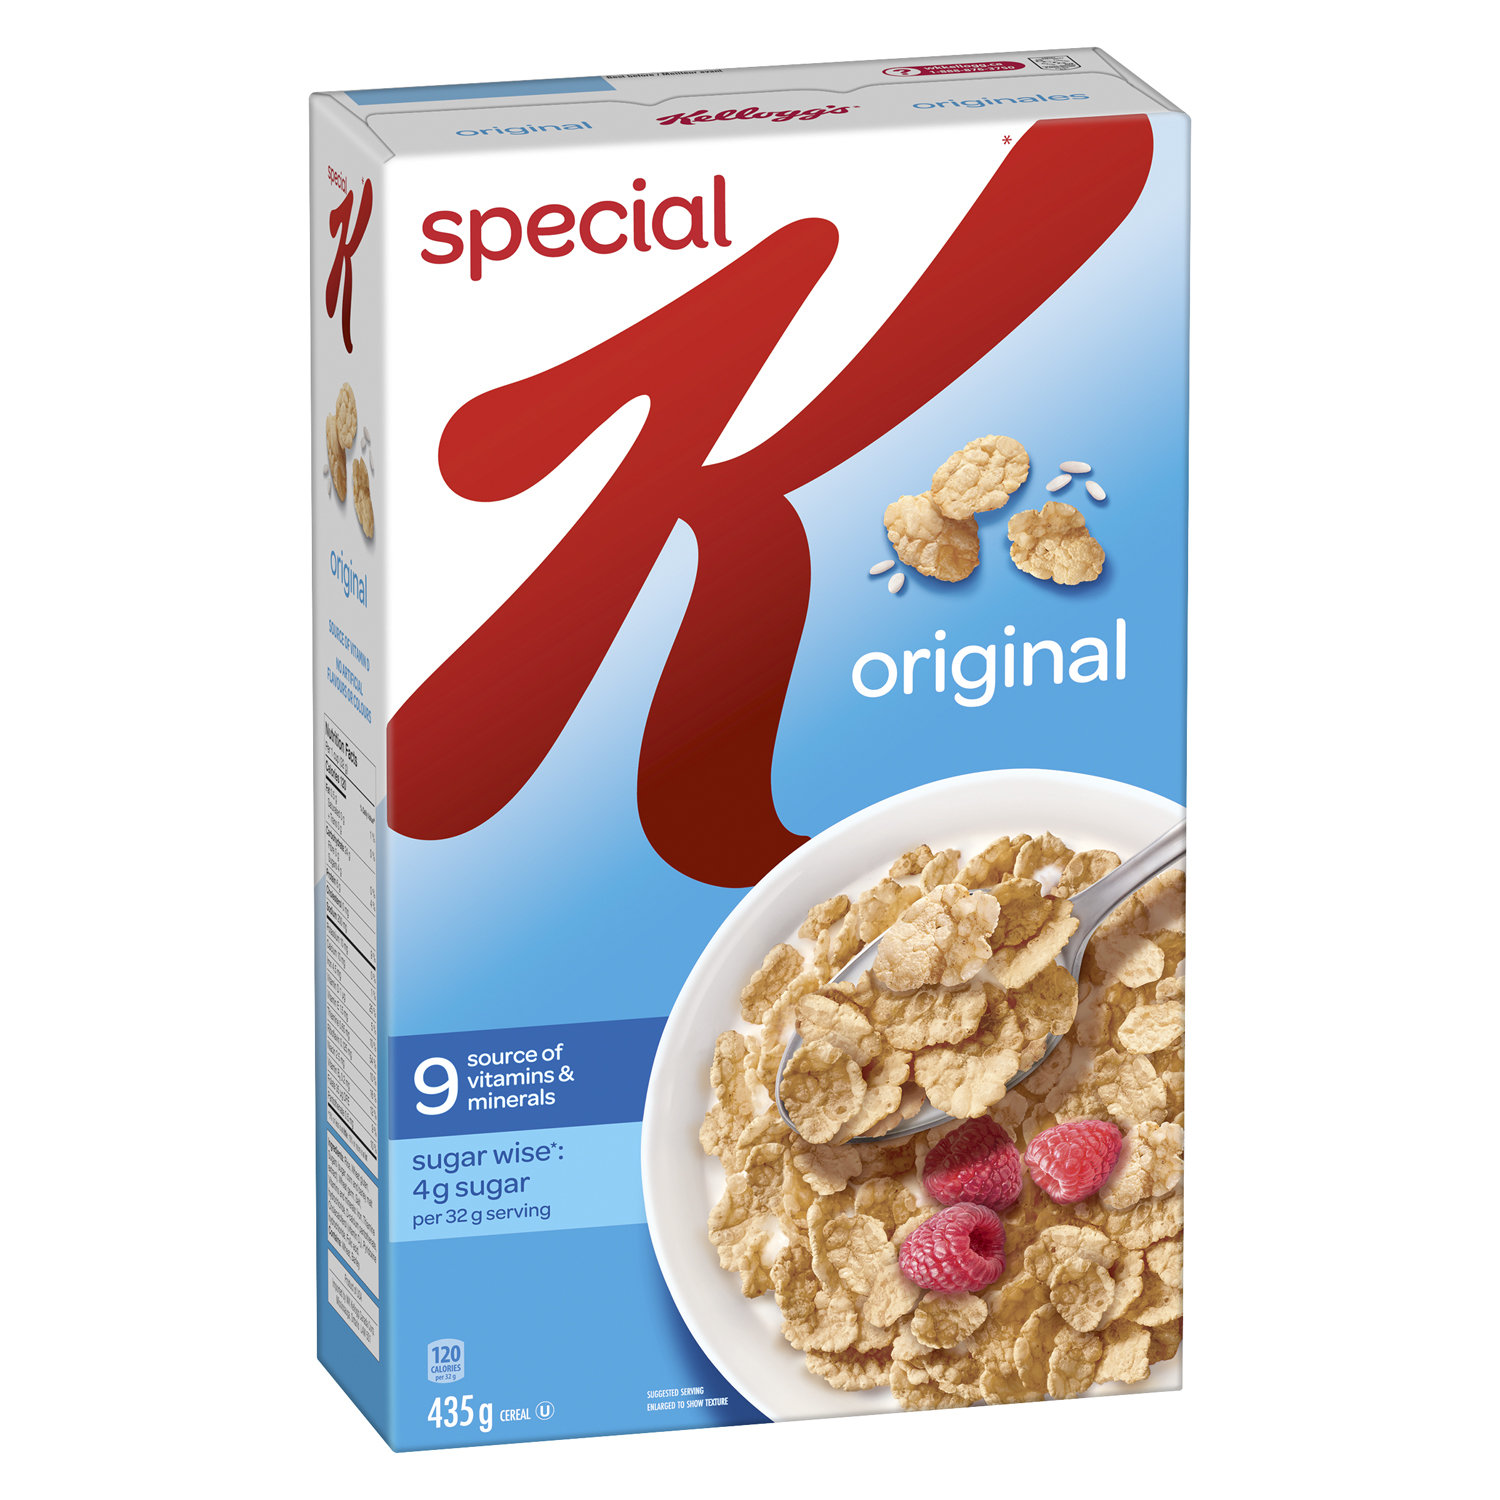 Kellogg's - Special K Original Cereal - Save-On-Foods